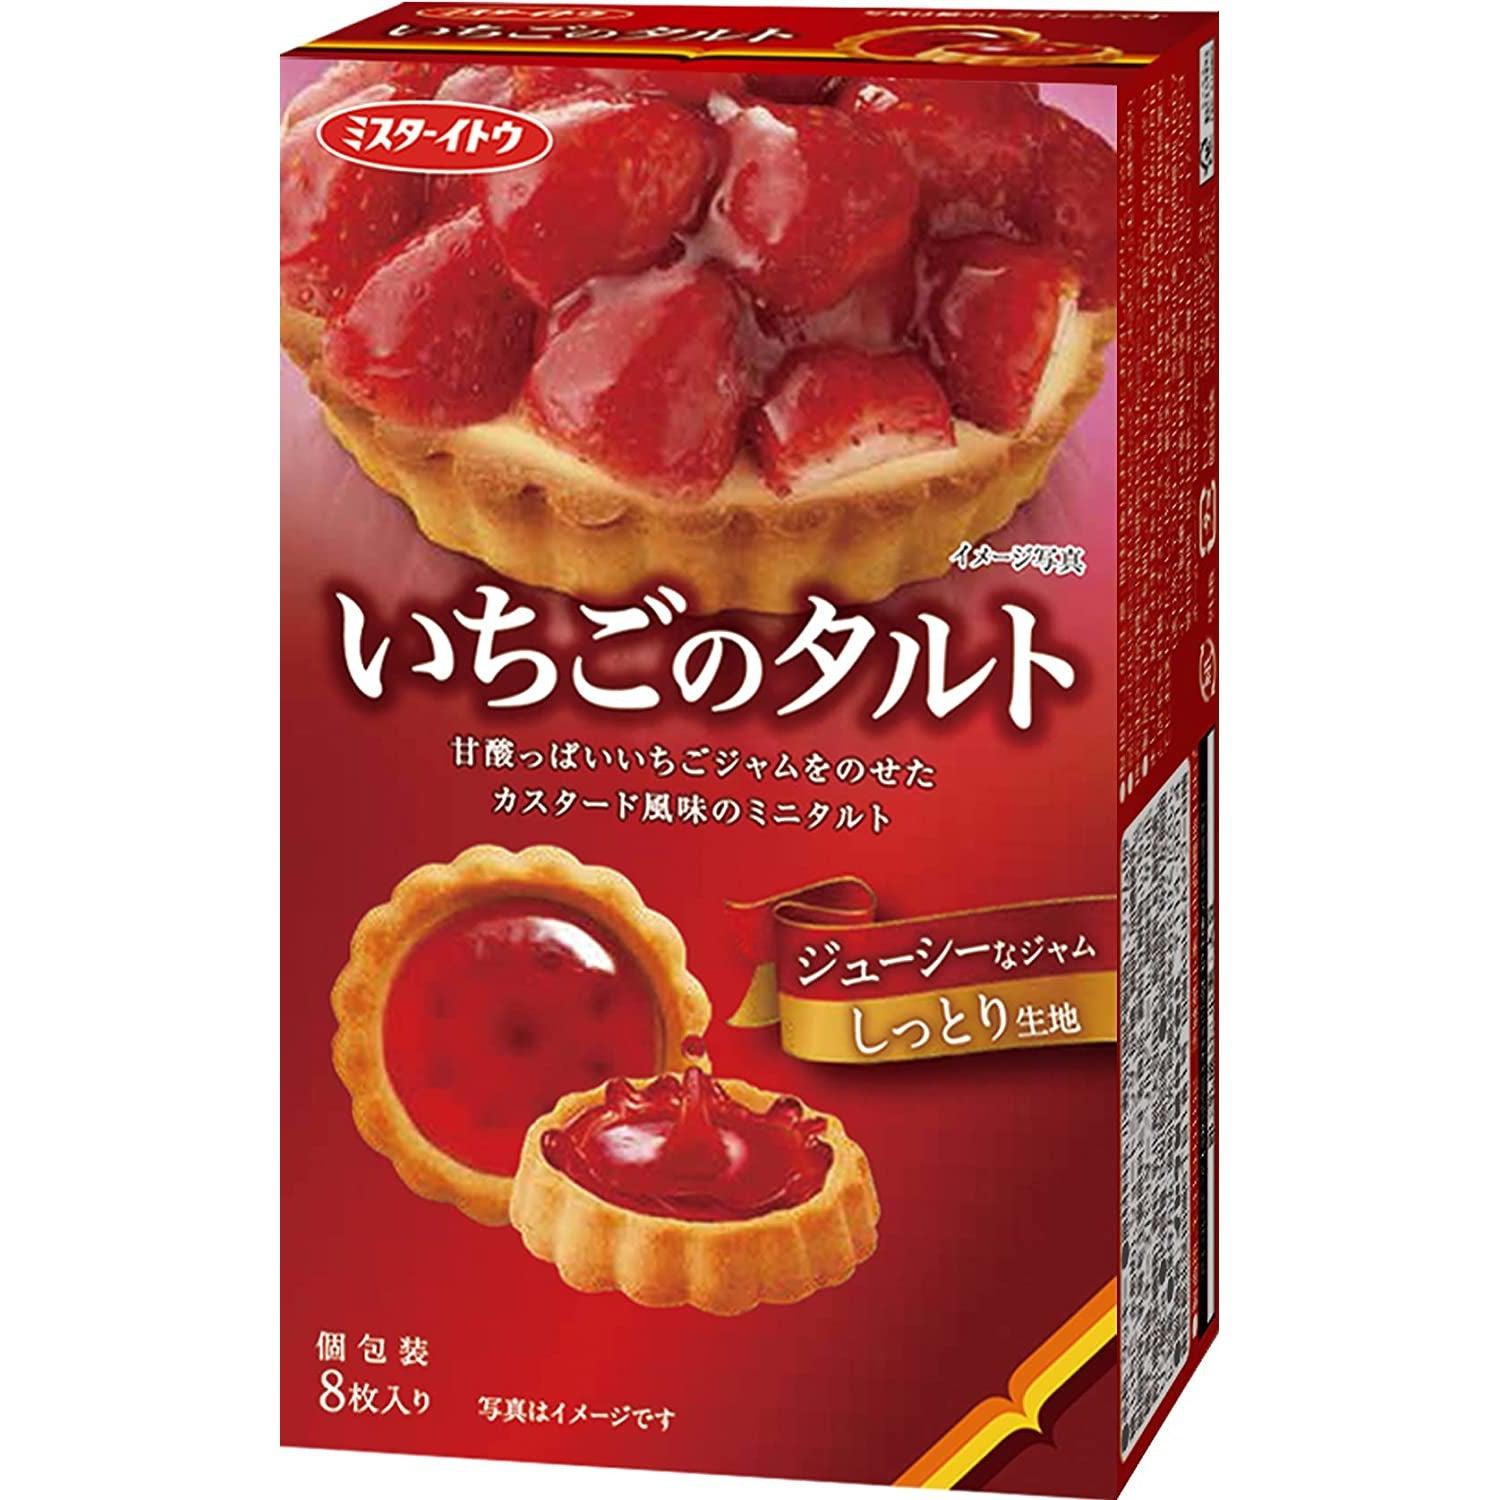 Mr. Ito Bite Sized Strawberry Tart Snack 8 Pieces (Pack of 3)